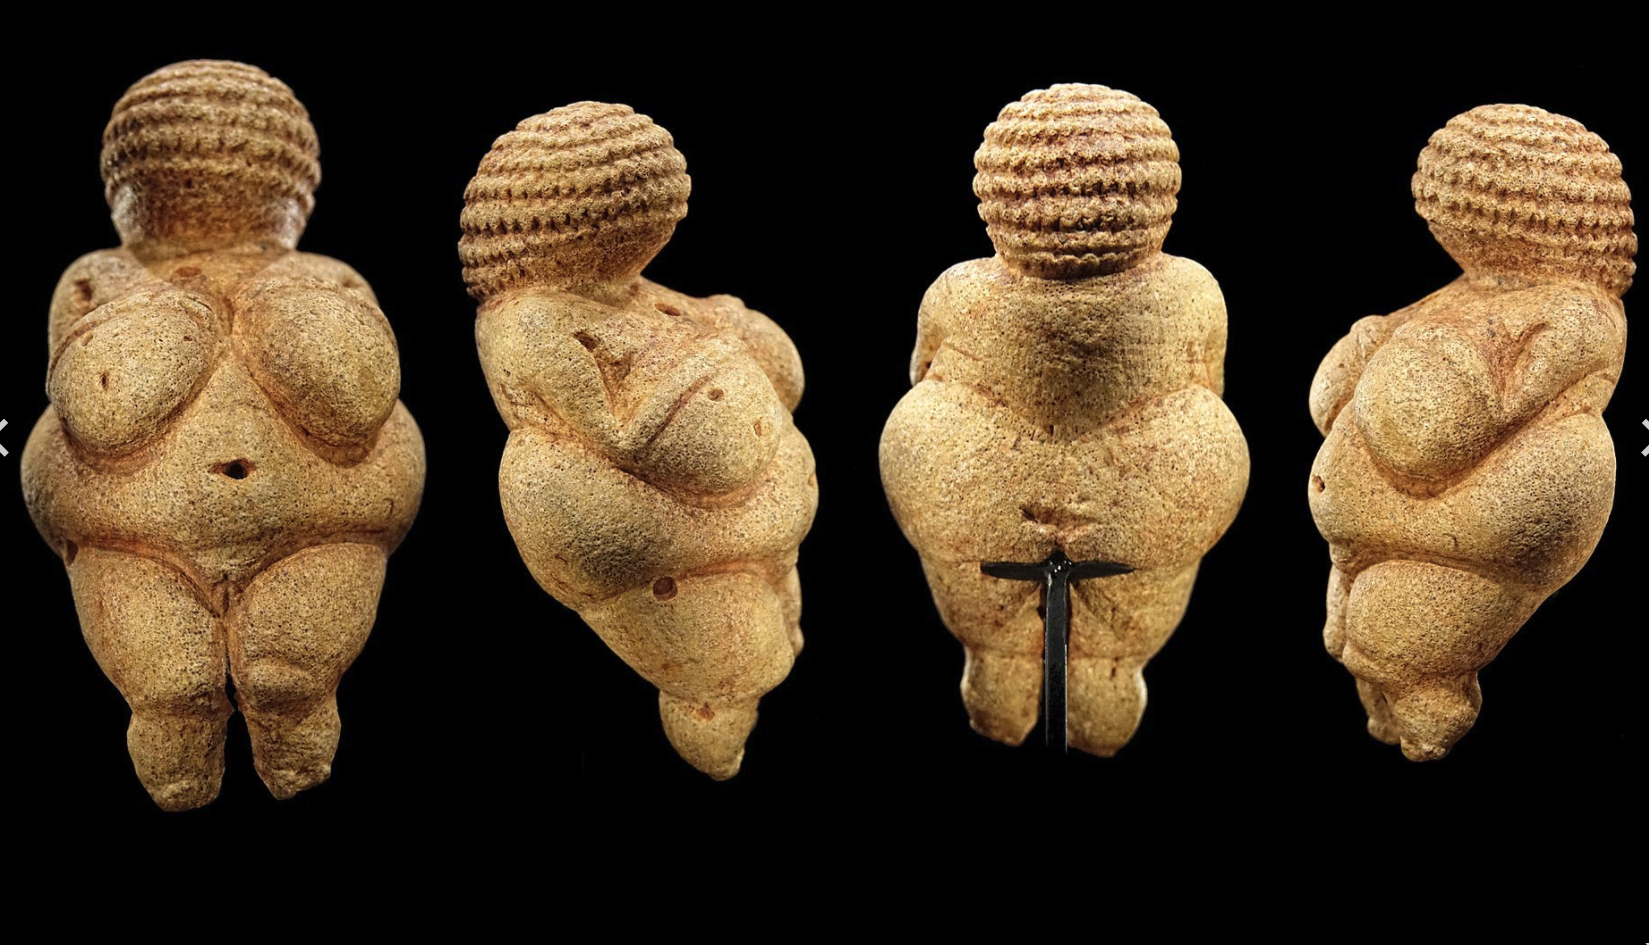 Venus of Willendorf as viewed from all sides.